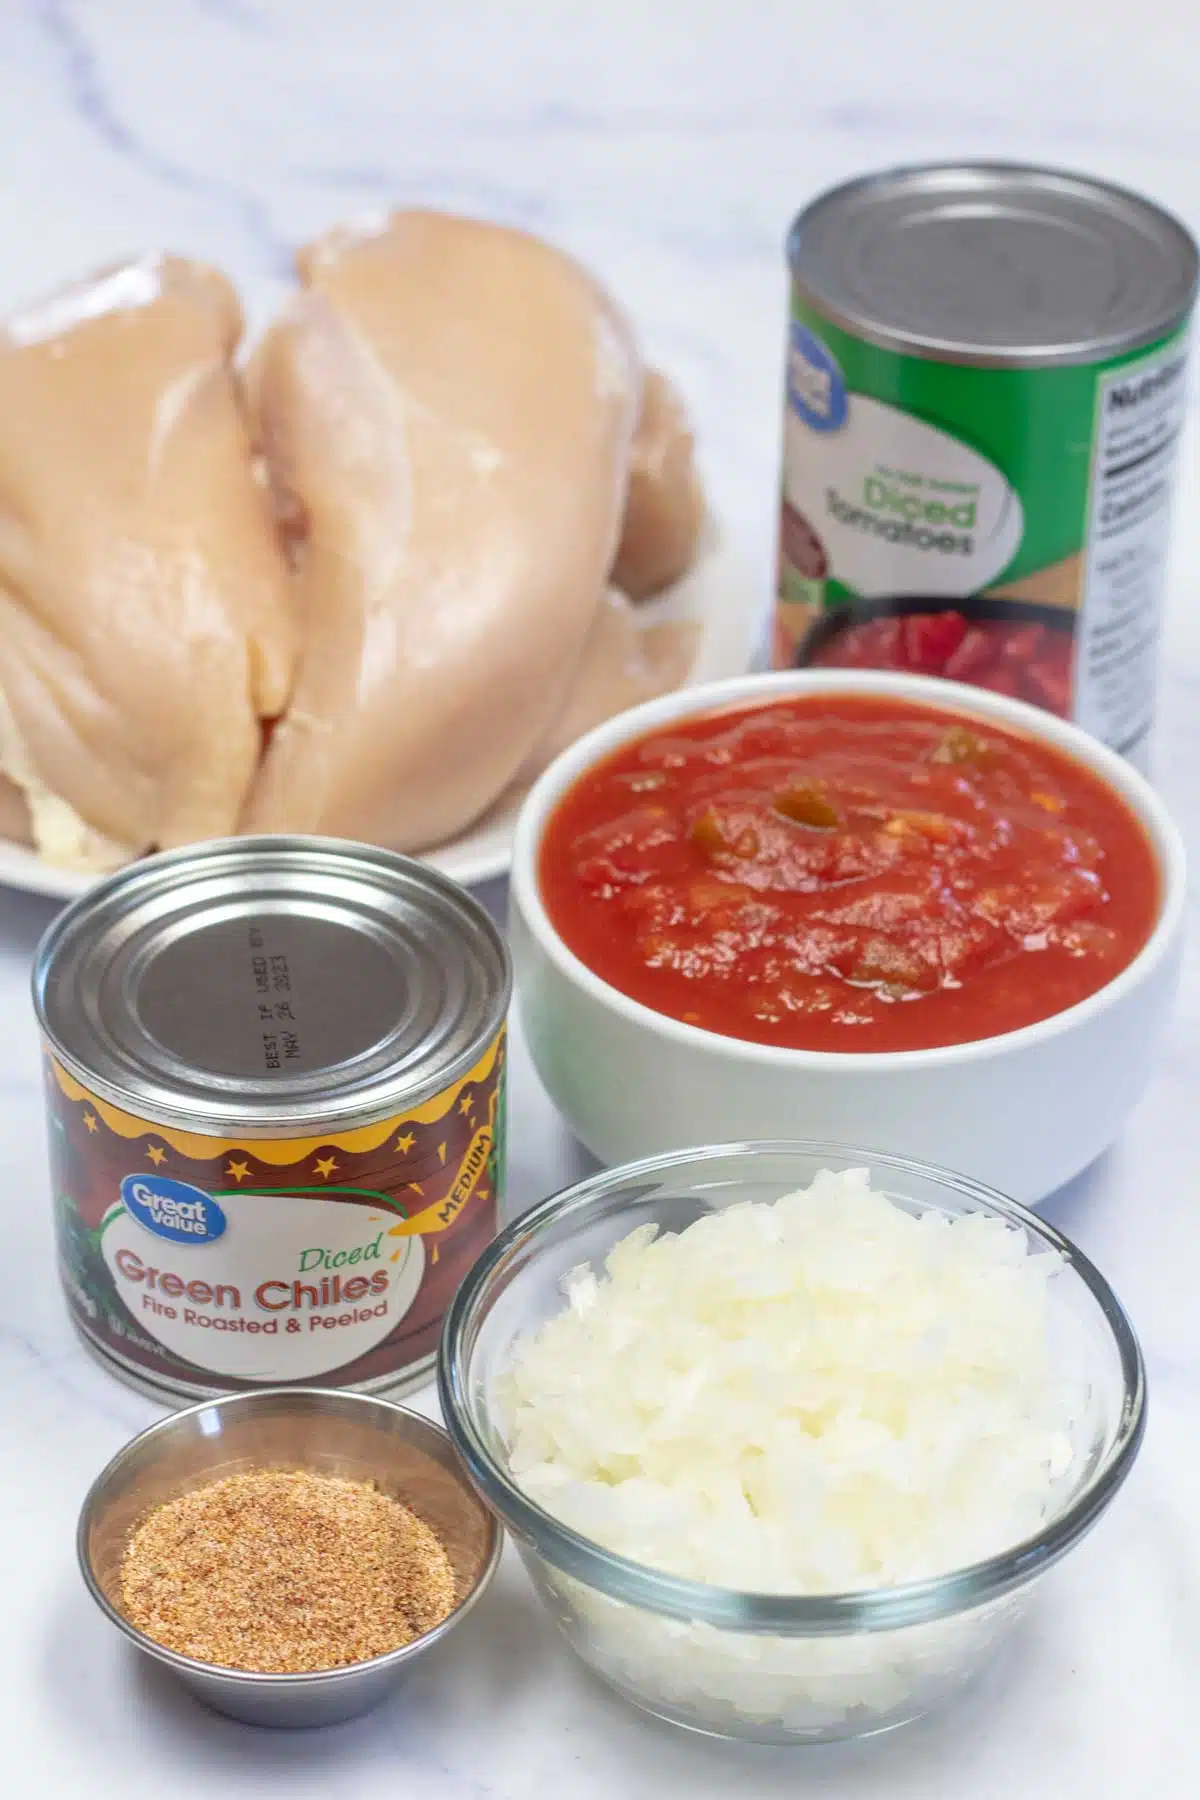 Tall image showing ingredients needed for crockpot chicken tacos.